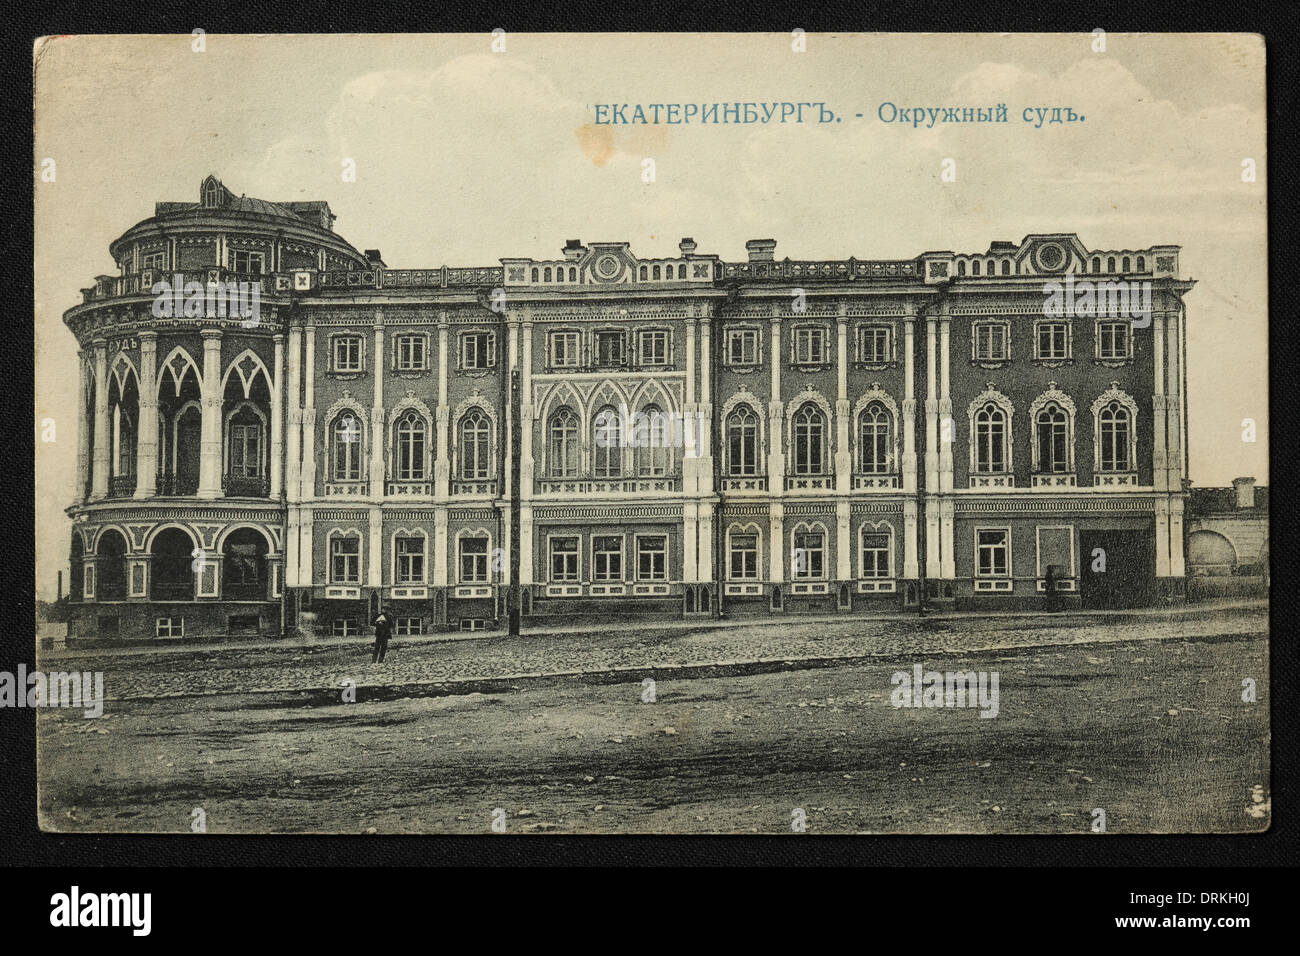 District Court also known as Sevastianov House in Yekaterinburg, Russian Empire. Black and white vintage photograph by Russian photographer Nikolai Vvedensky dated from the beginning of the 20th century issued in the Russian vintage postcard published by M.S. Semkov, Yekaterinburg. Text in Russian: Yekaterinburg. District Court. The District Court also known as Sevastianov House or the Trade Union House is the architectural monument from the 19th century now served as one of the official residences of Russian president. Courtesy of the Azoor Postcard Collection. Stock Photo